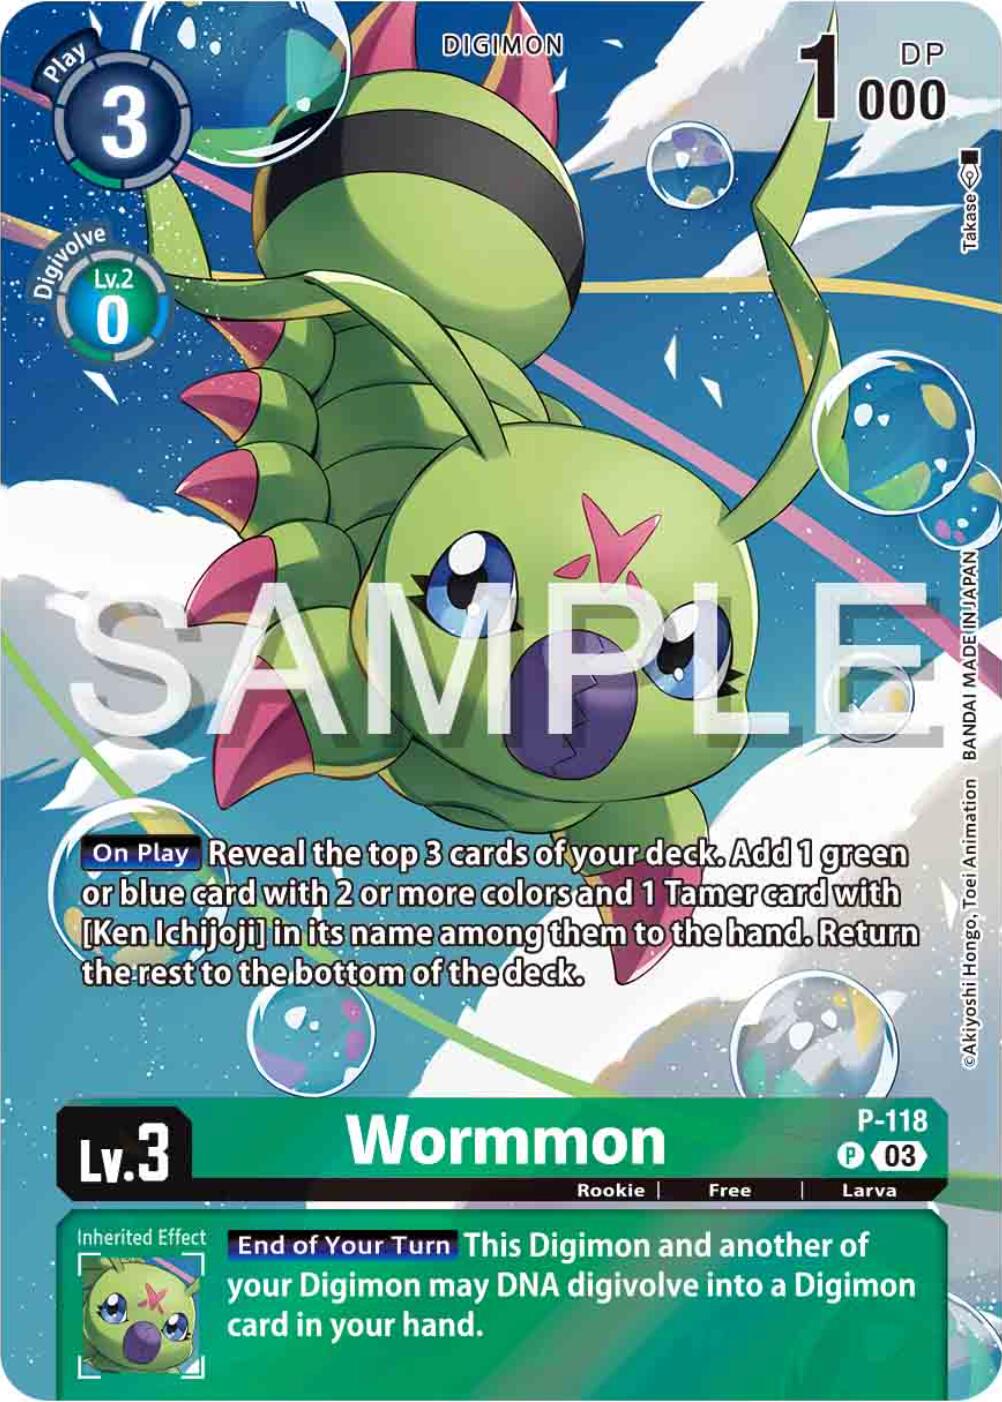 Wormmon [P-118] (Digimon Adventure 02: The Beginning Set) [Promotional Cards] | Mindsight Gaming